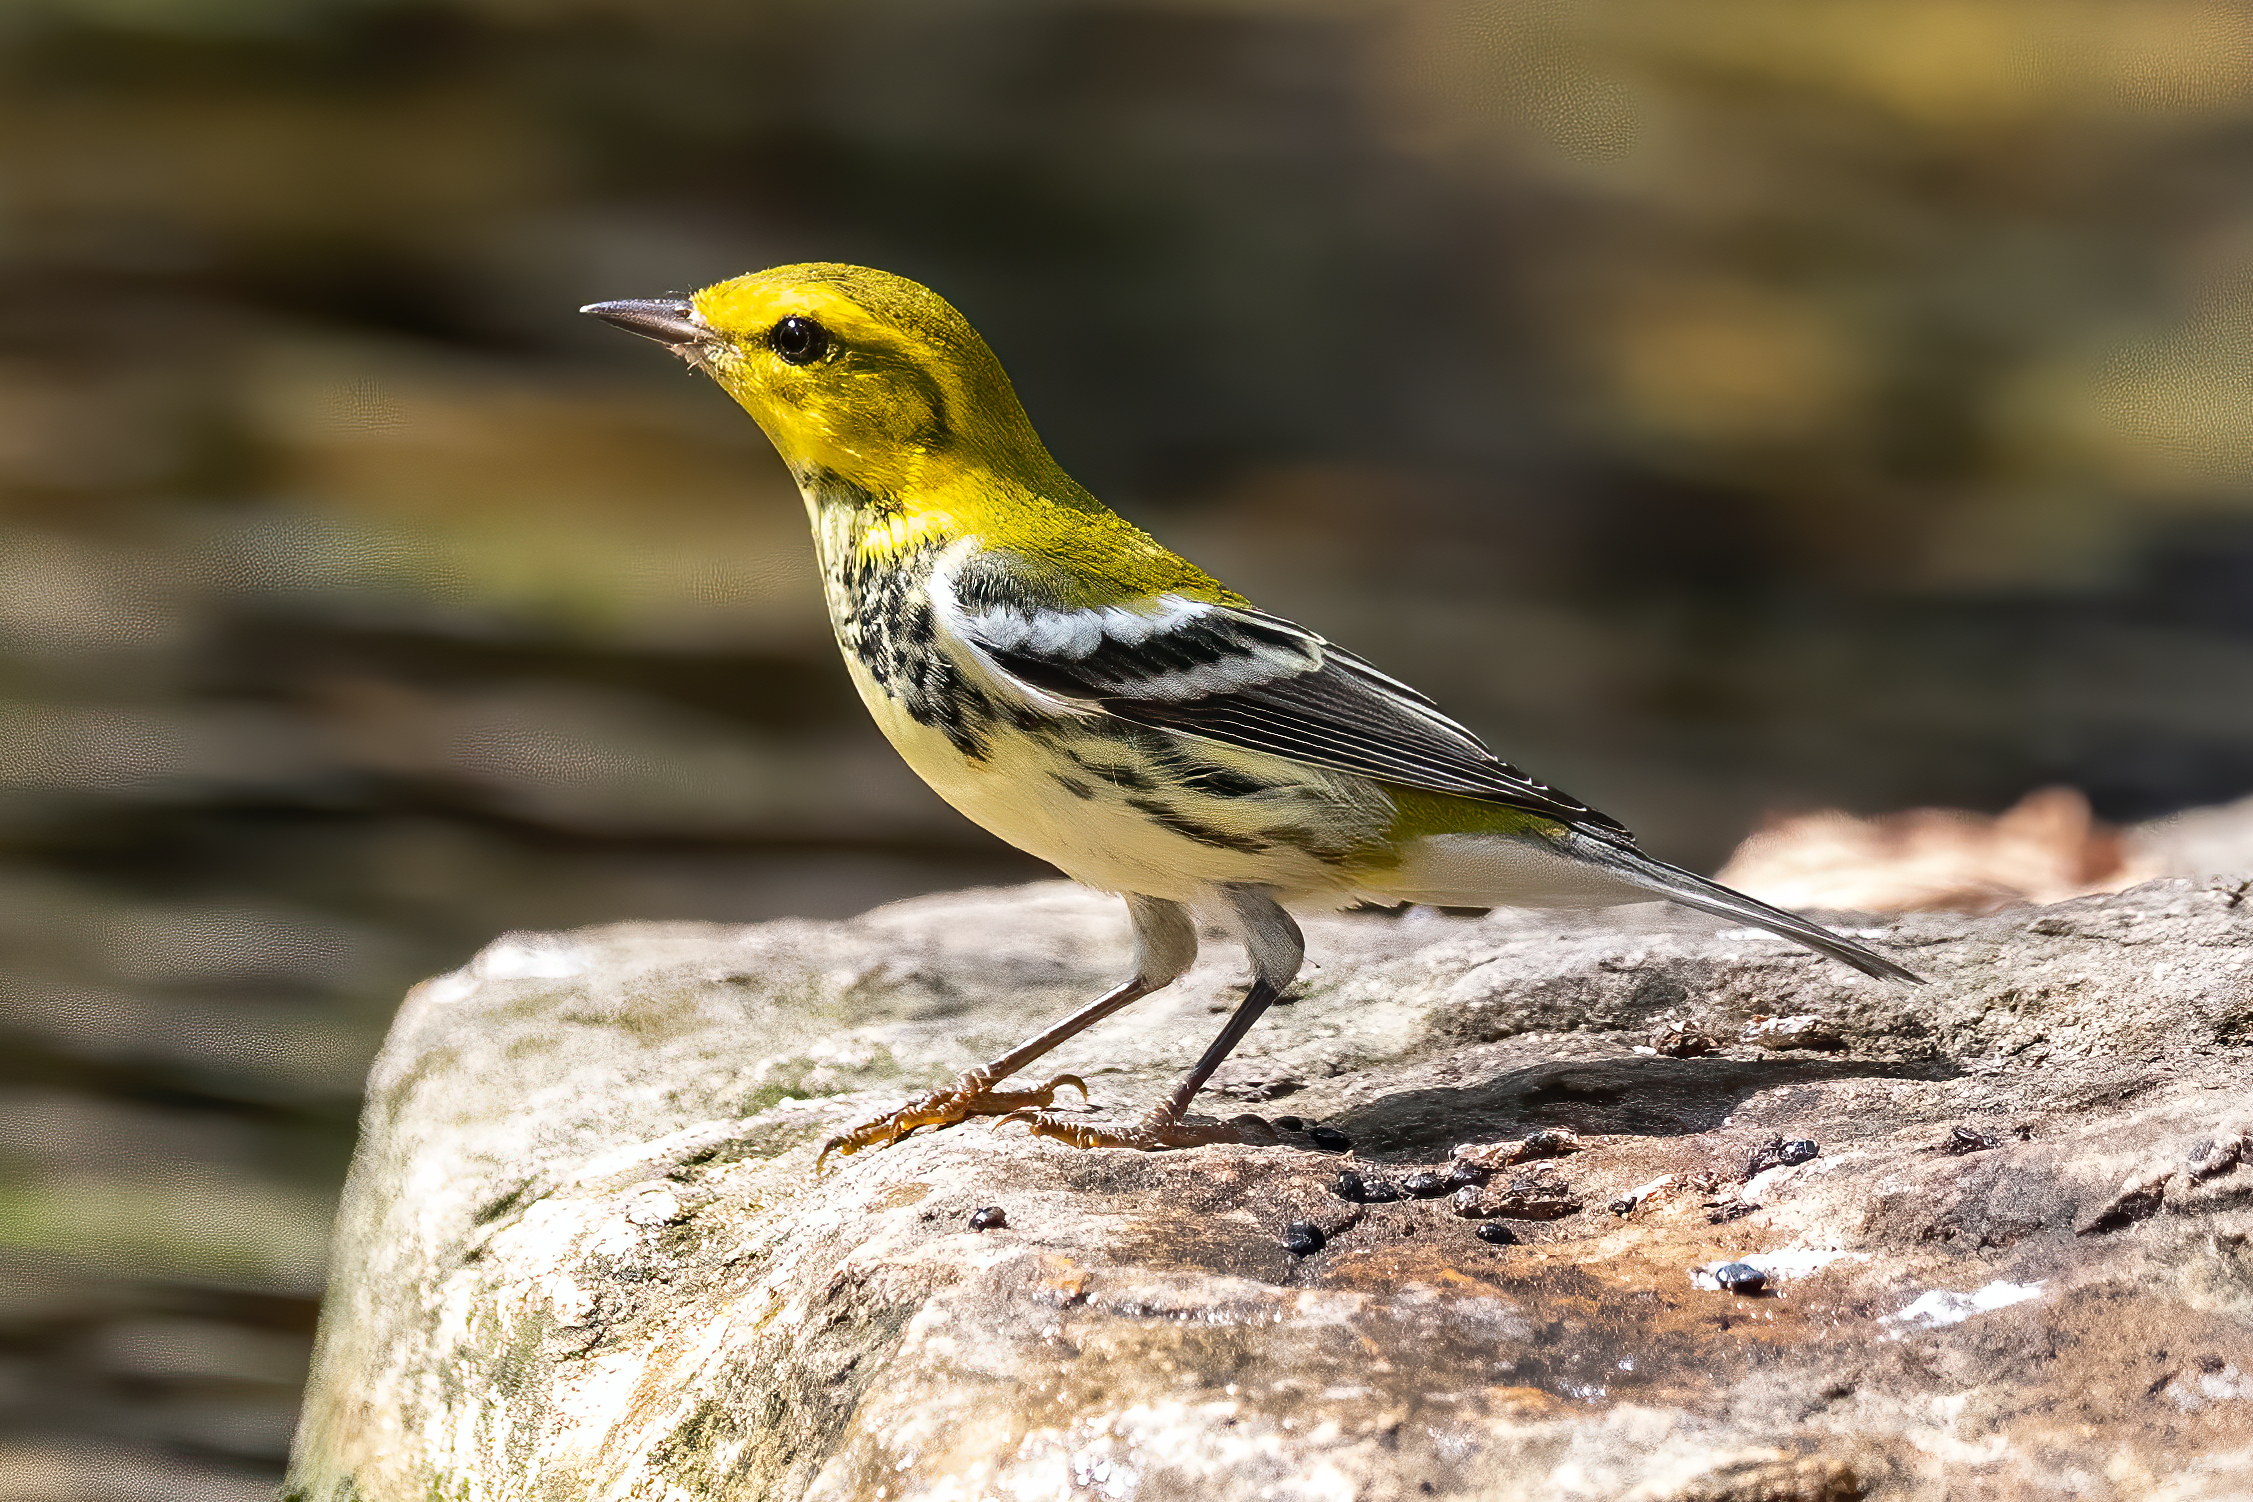 Black-throated Green Warbler, Tower Grove Park